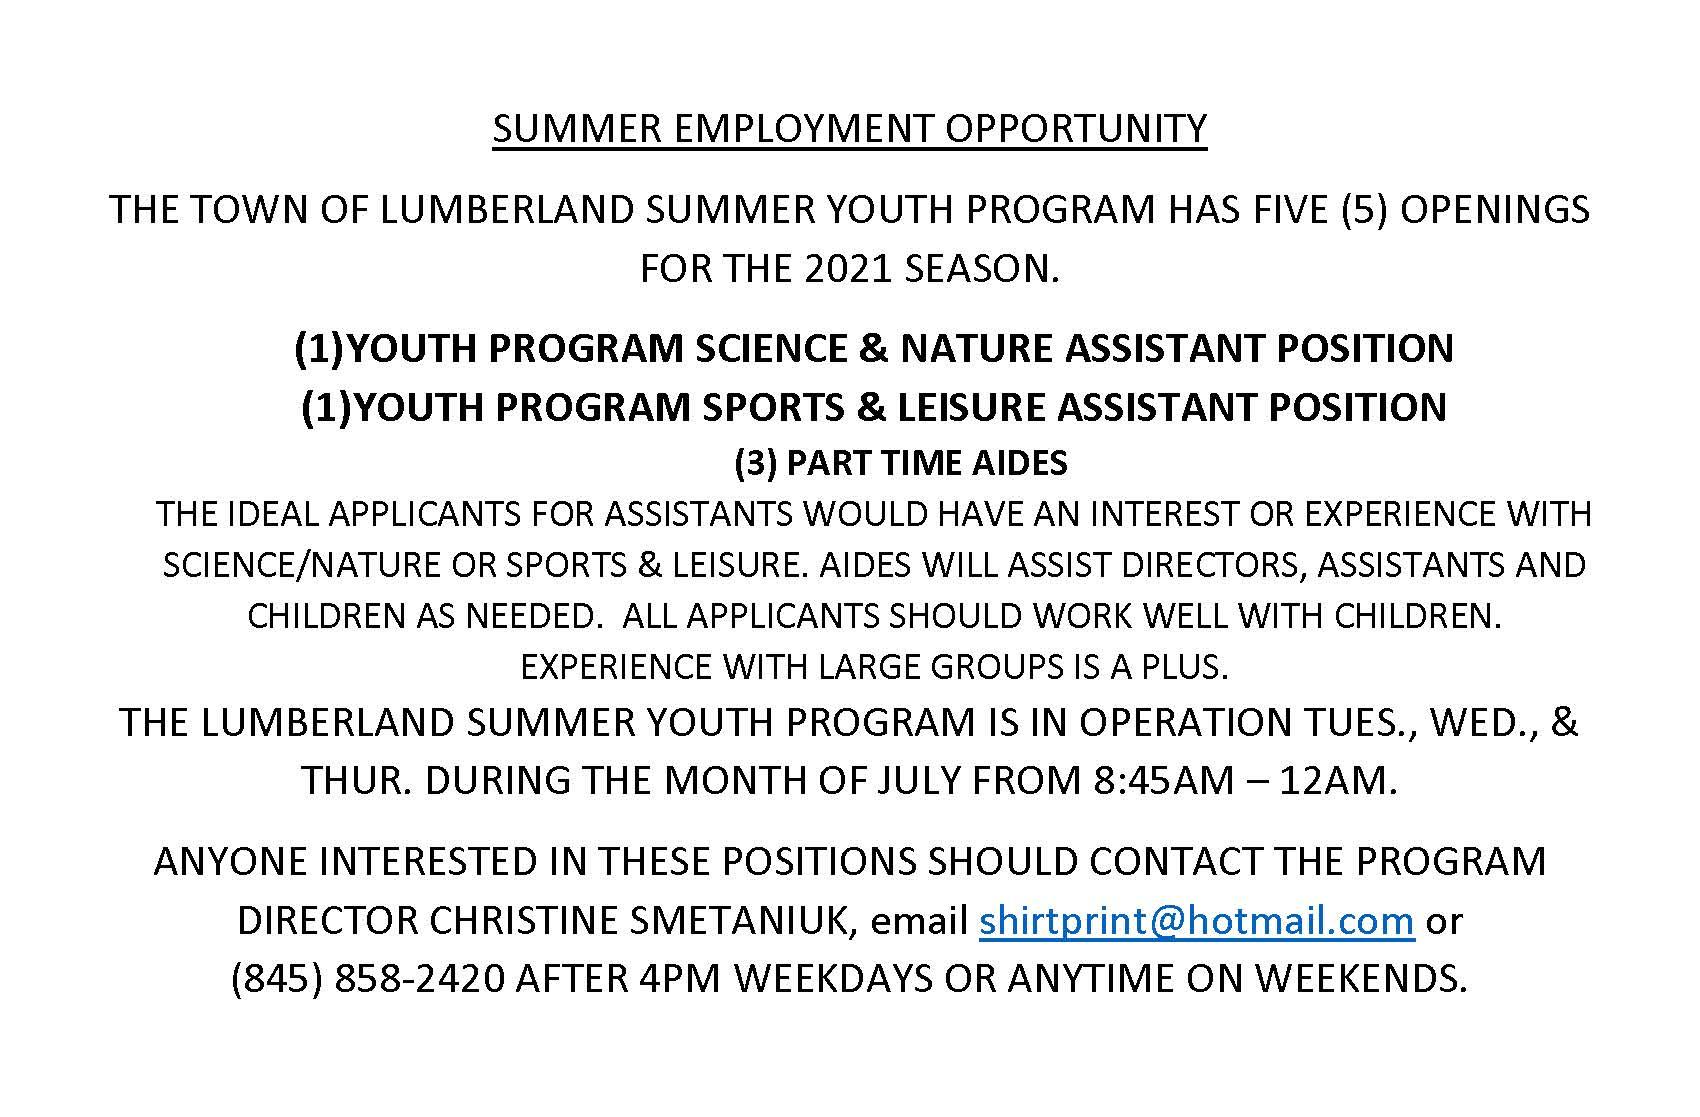 SUMMER EMPLOYMENT OPPORTUNITY (1) - Copy